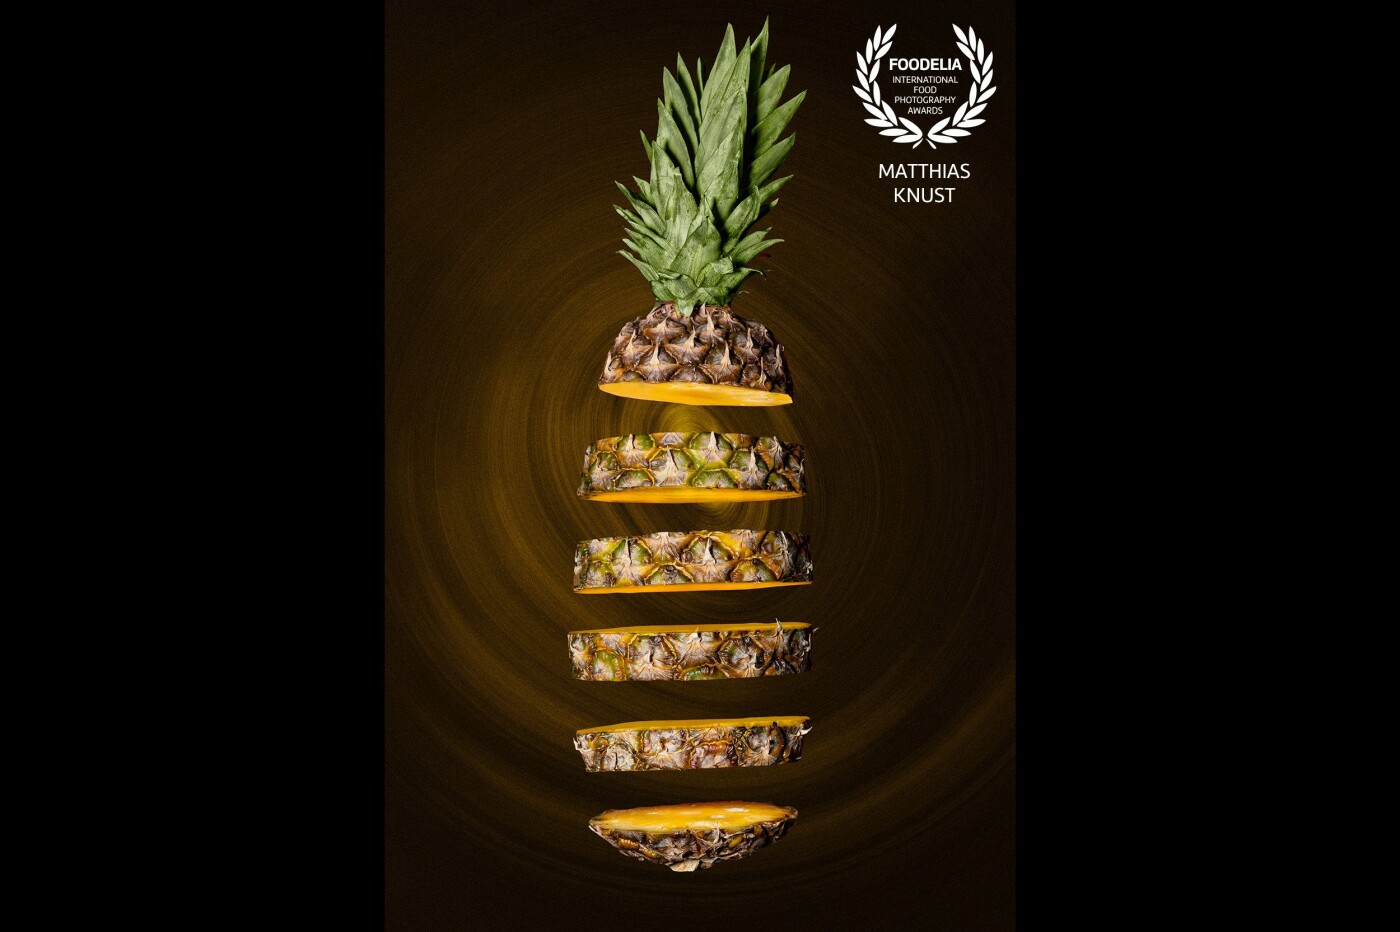 Free work. The aim was to present the pineapple as a "technical representation". The inner organic shows the freshness and texture of the fruit. I like minimalistic food photos that despite their "simplicity" invite you to look at the picture for more than 3 seconds.